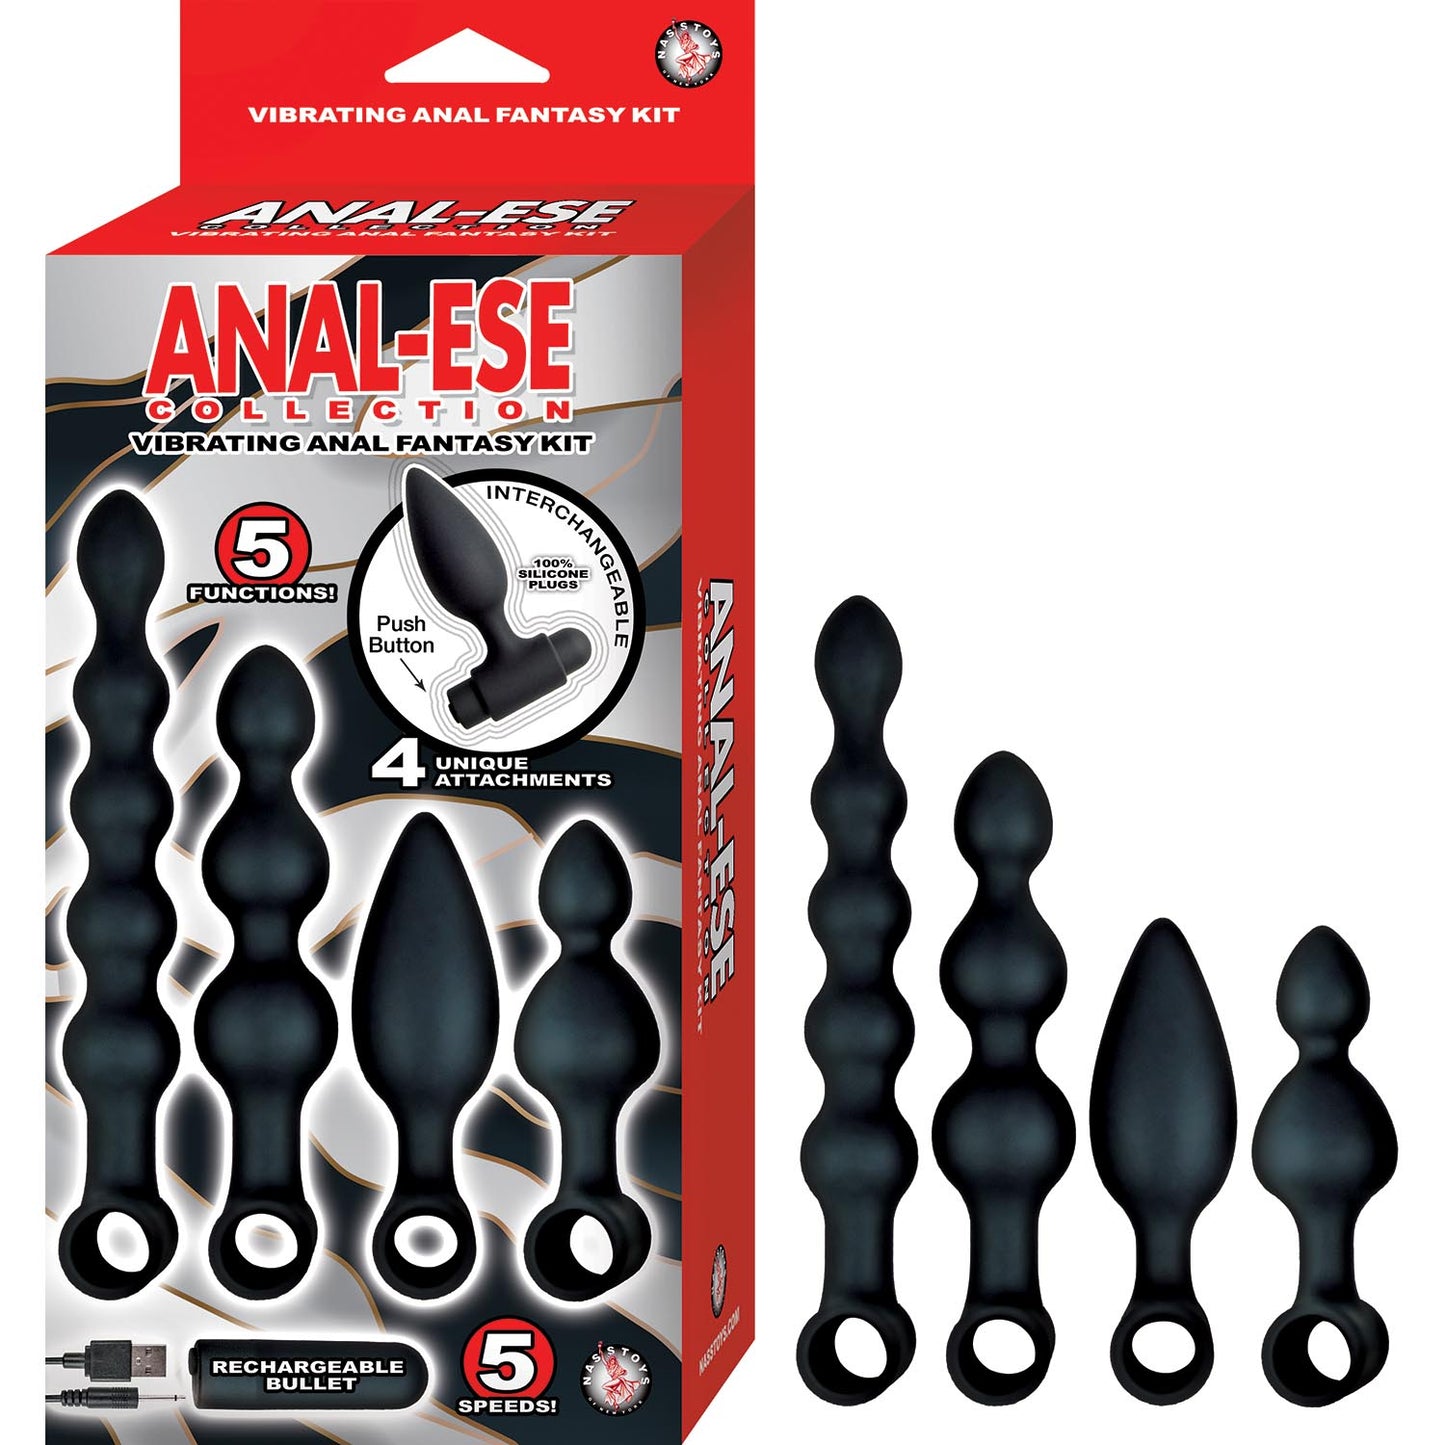 Anal-Ese: Collection Vibrating Anal Fantasy Kit